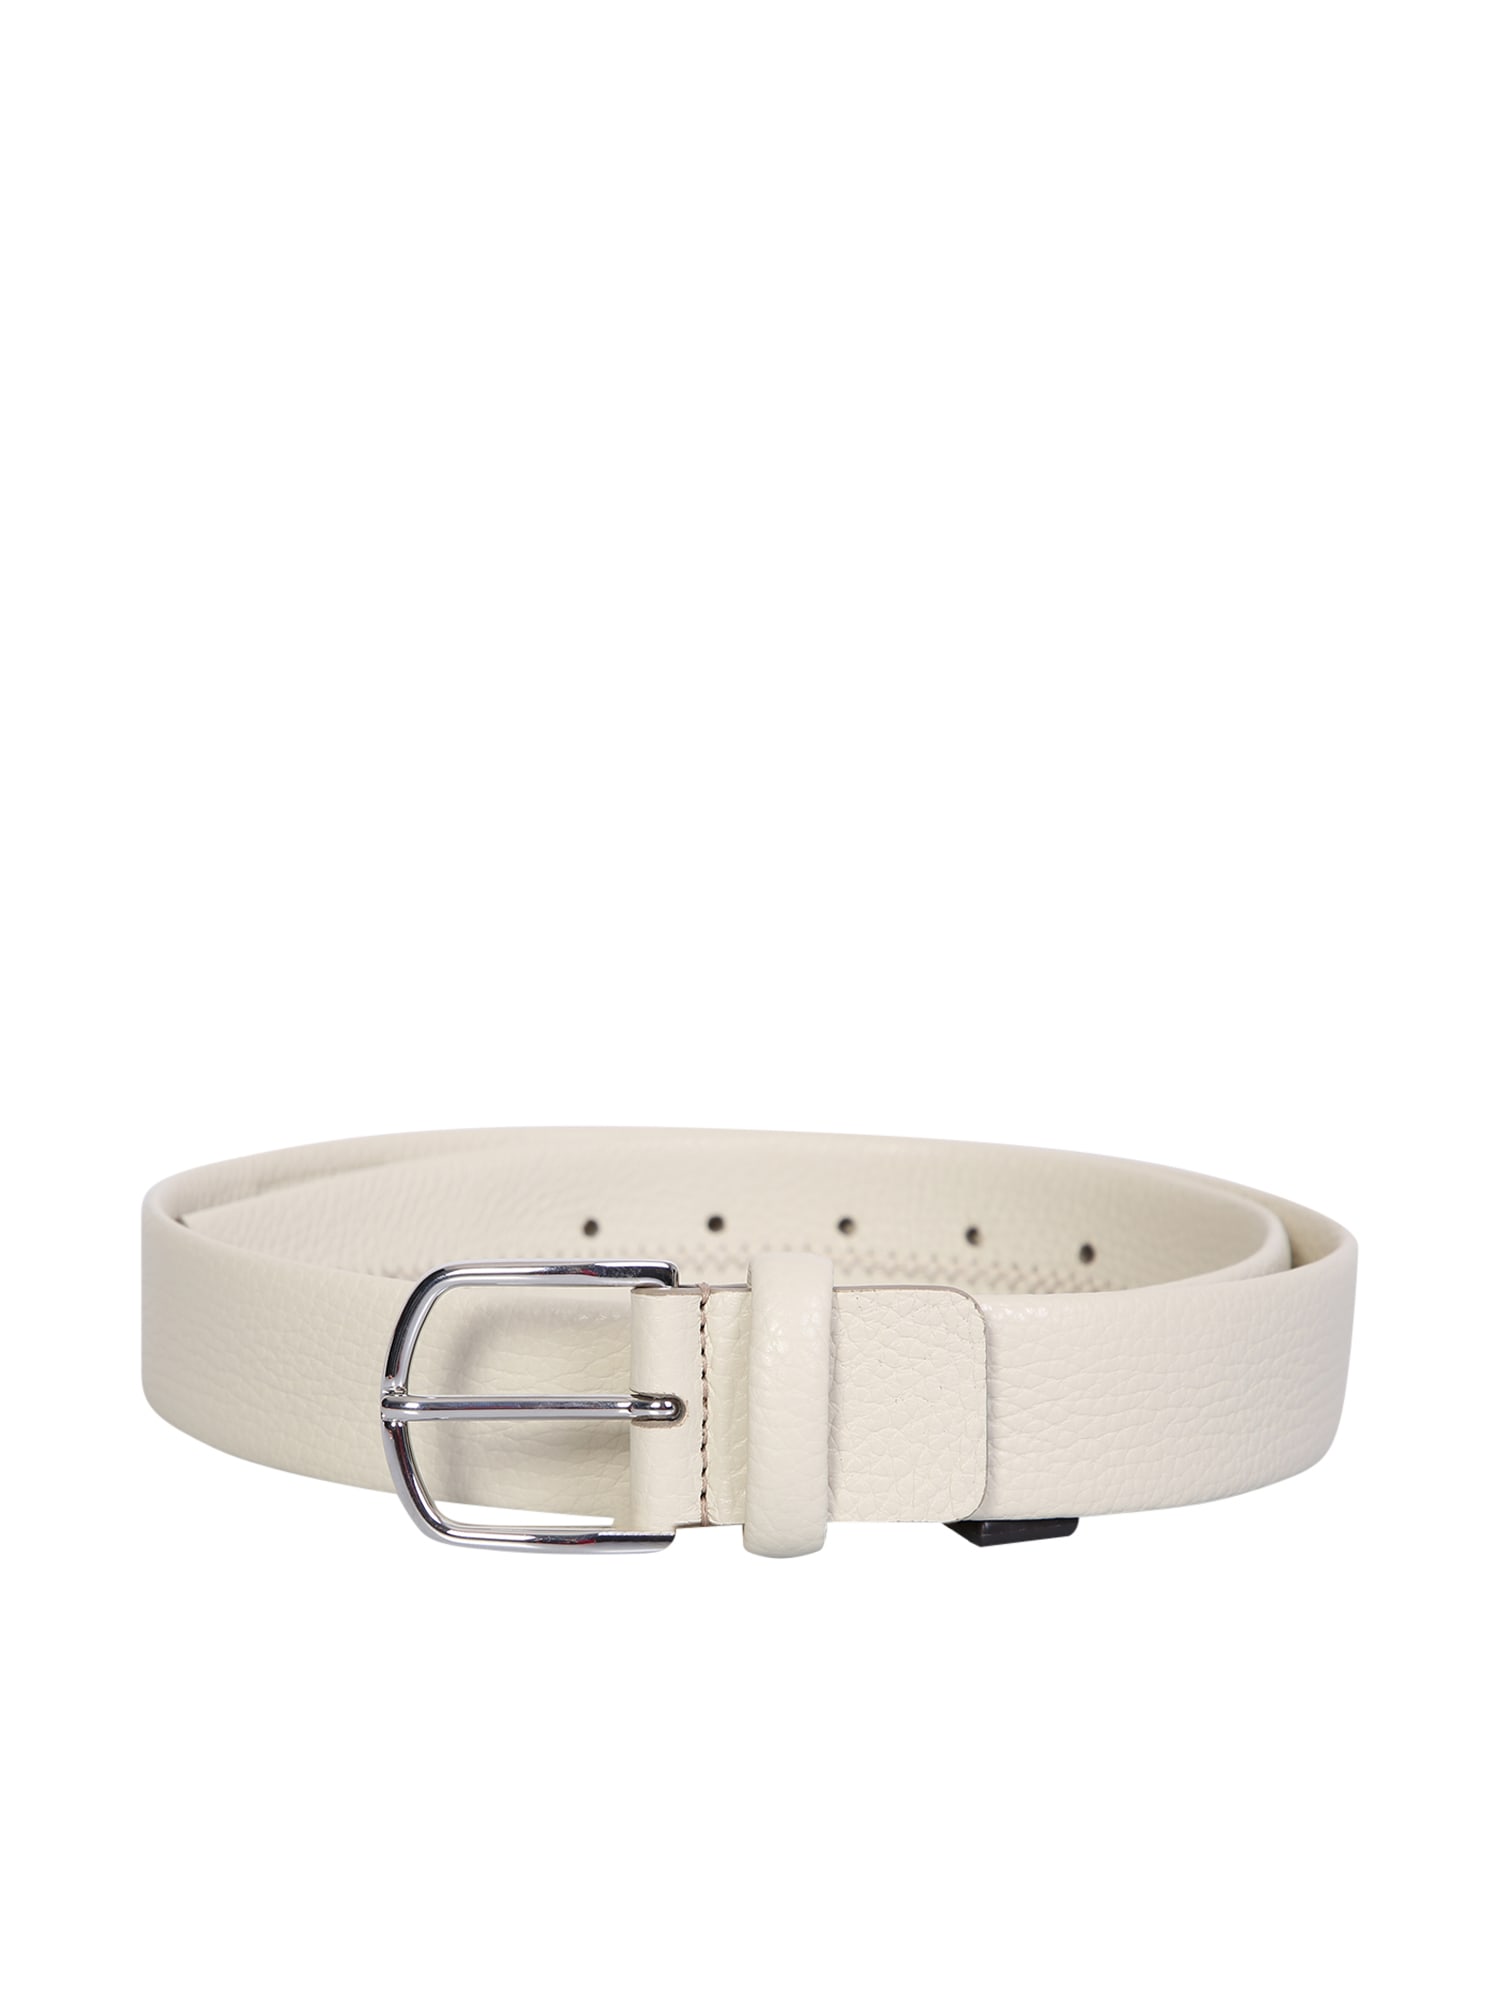 CANALI LEATHER OFF-WHITE BELT